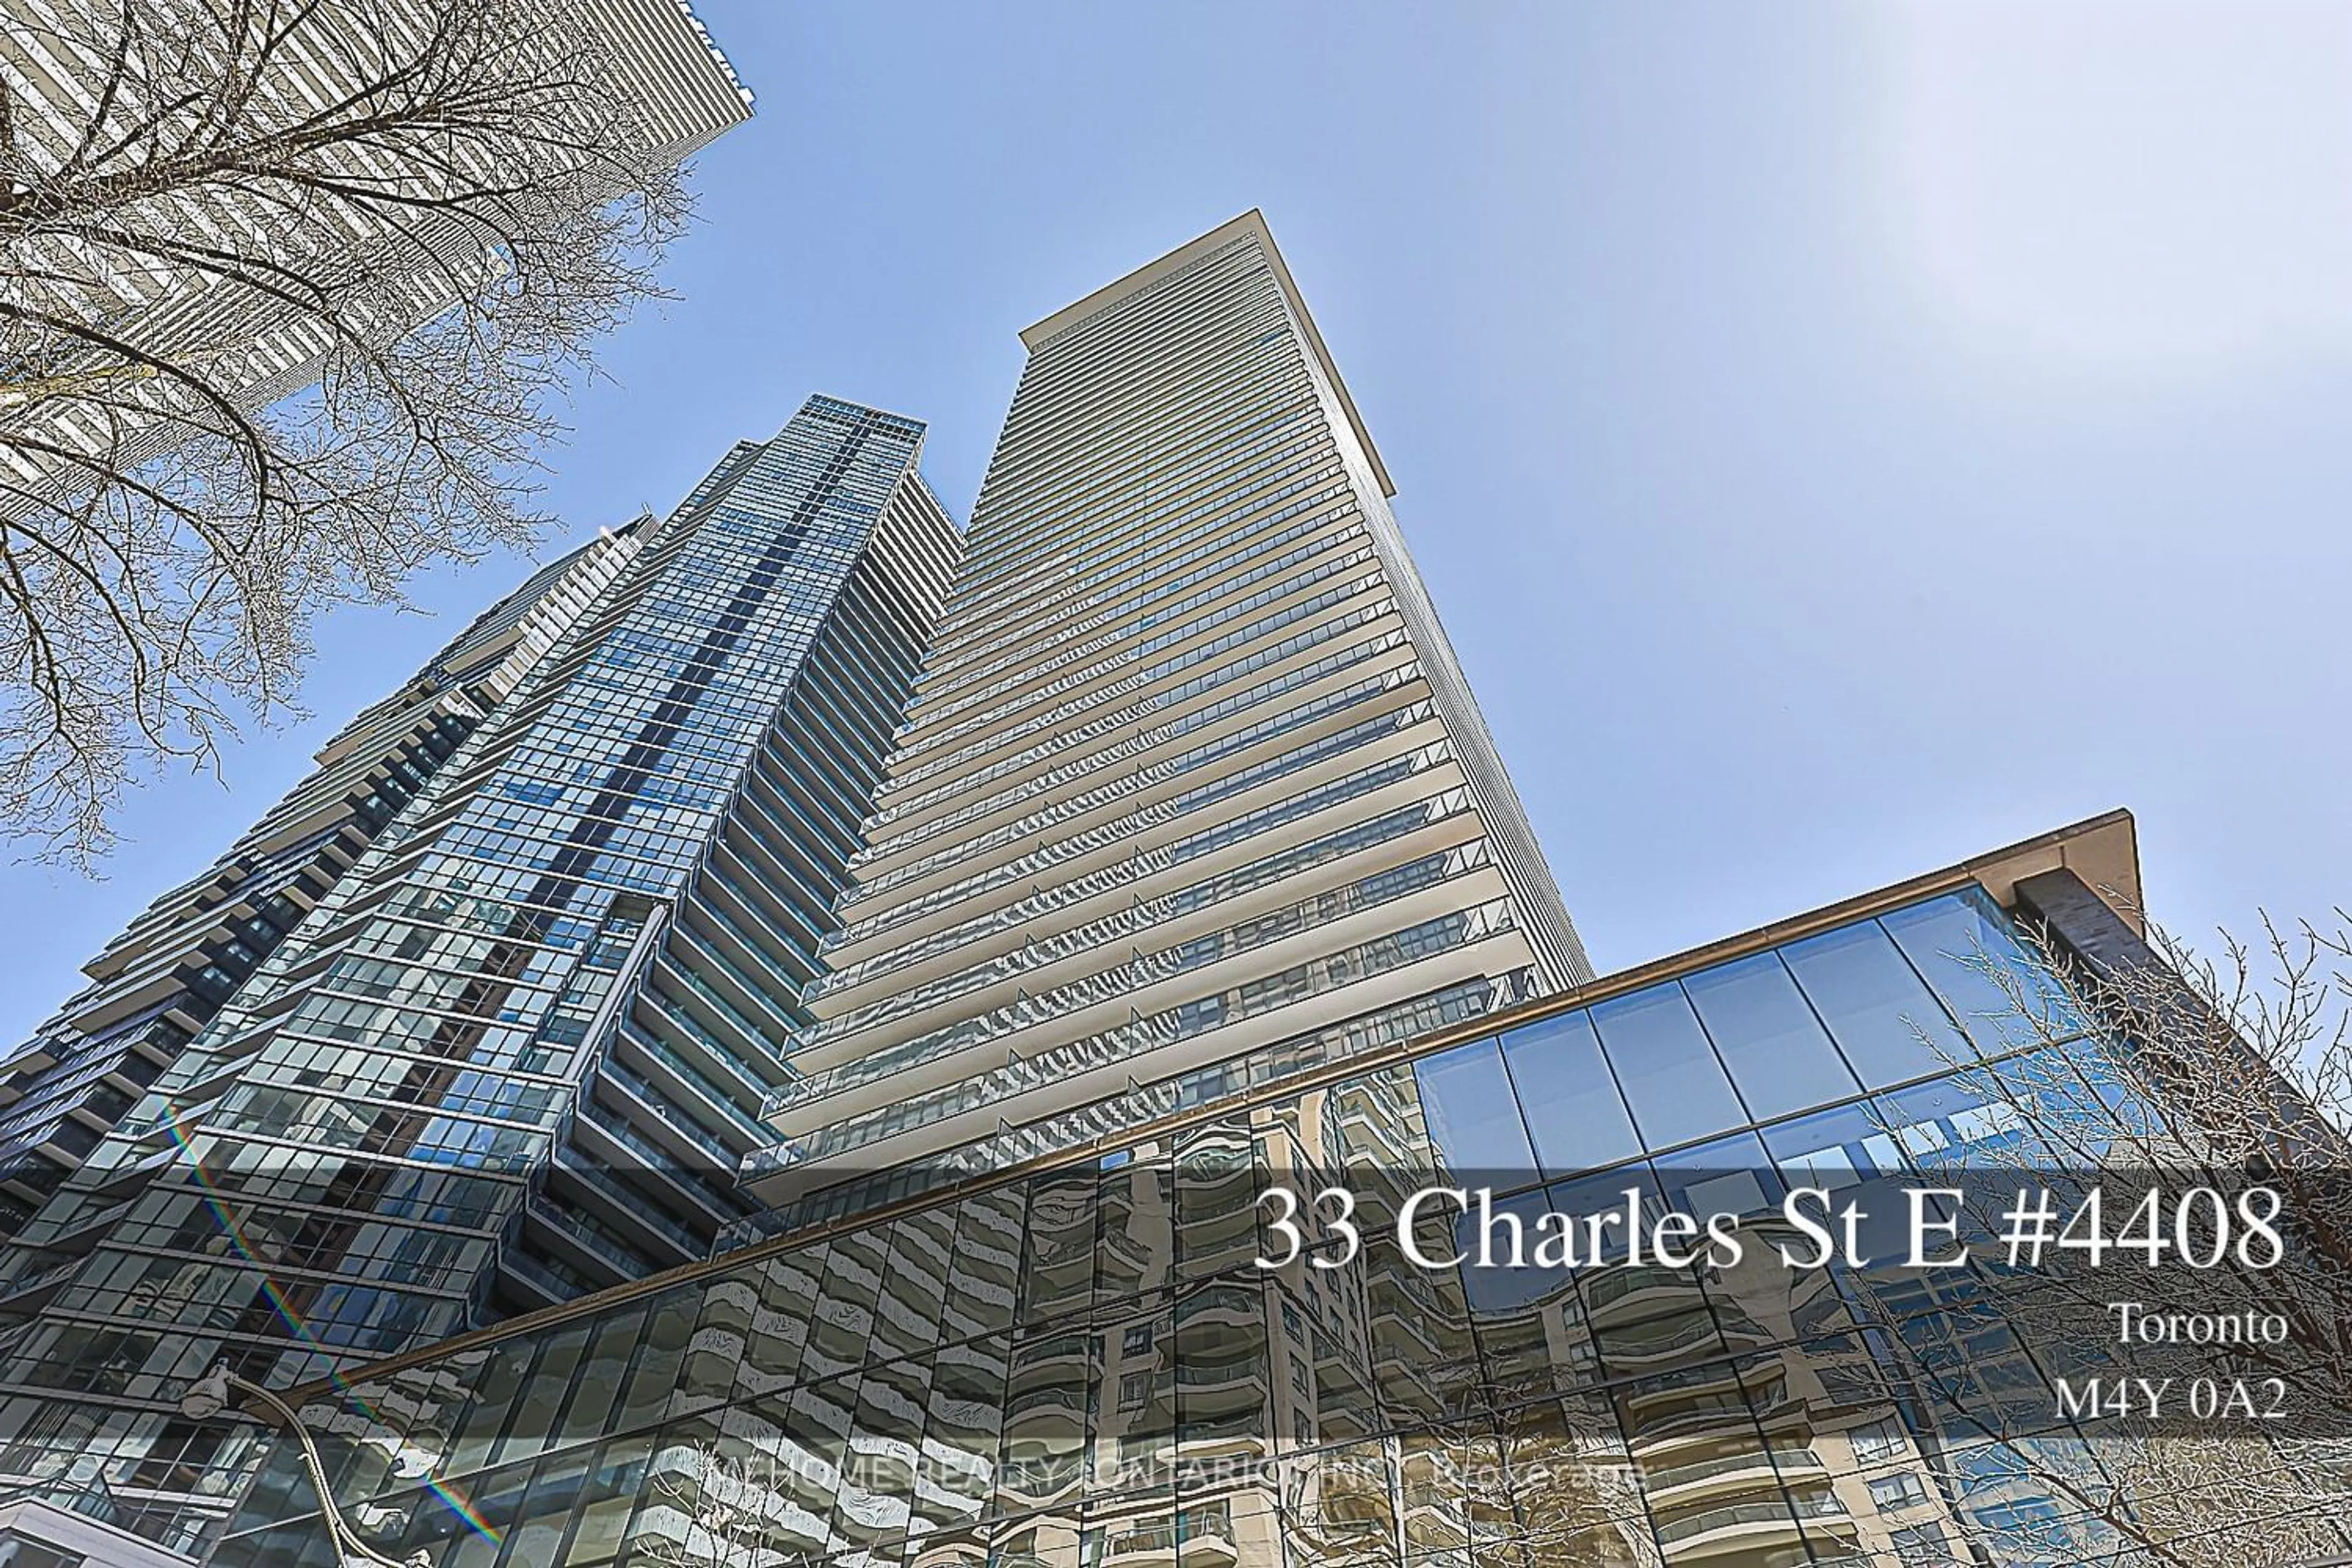 A pic from exterior of the house or condo for 33 Charles St #4408, Toronto Ontario M4Y 0A2